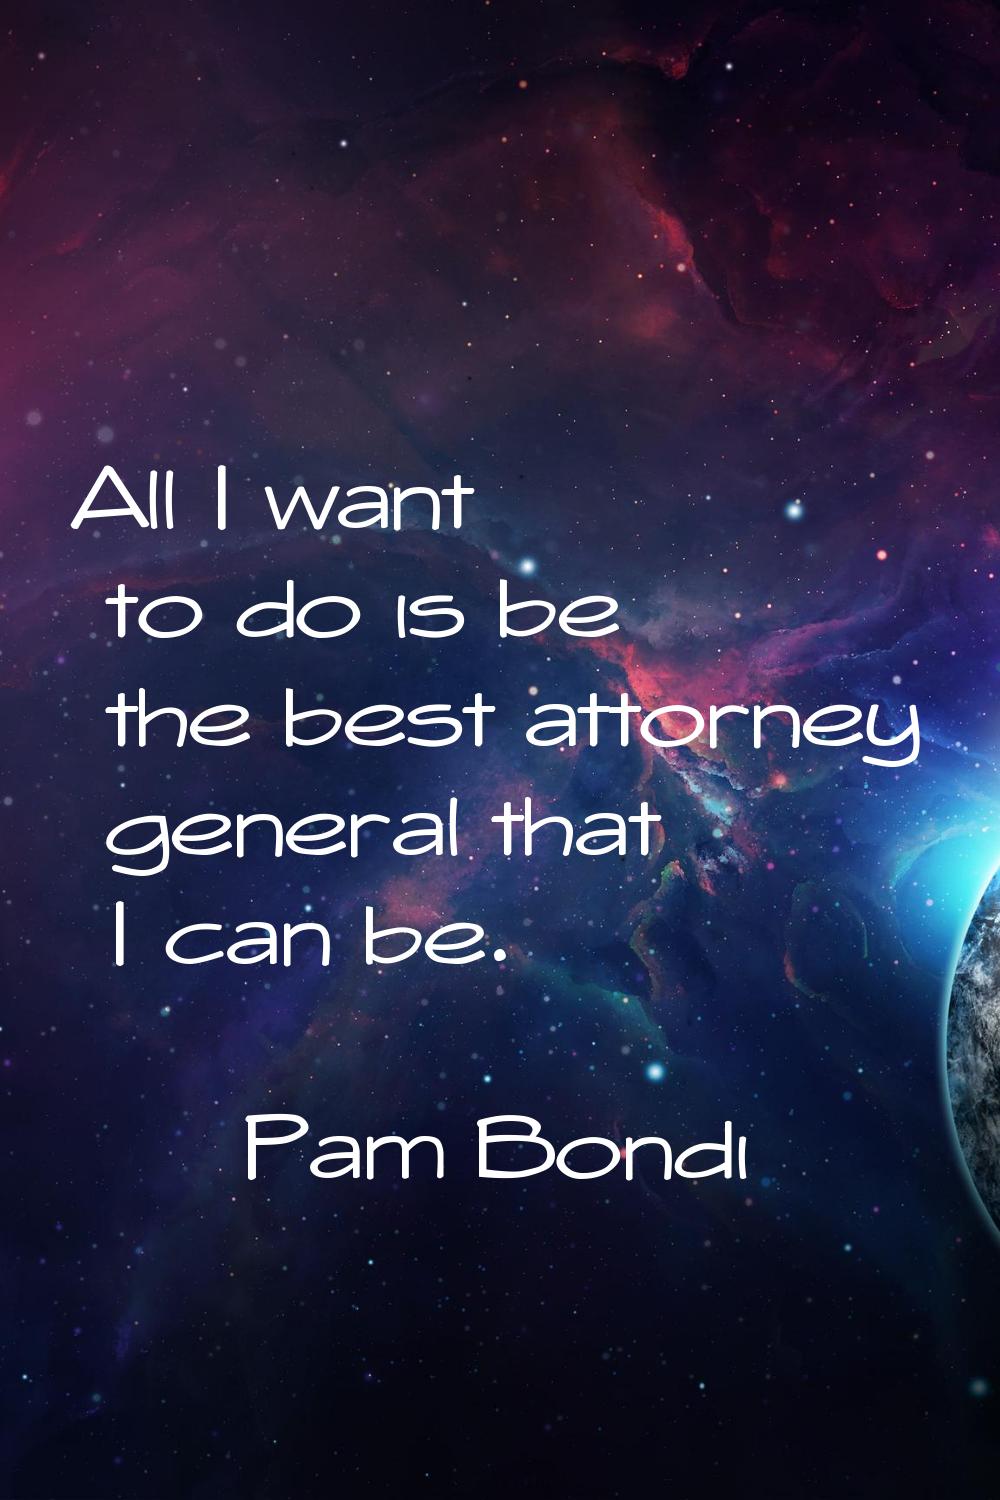 All I want to do is be the best attorney general that I can be.